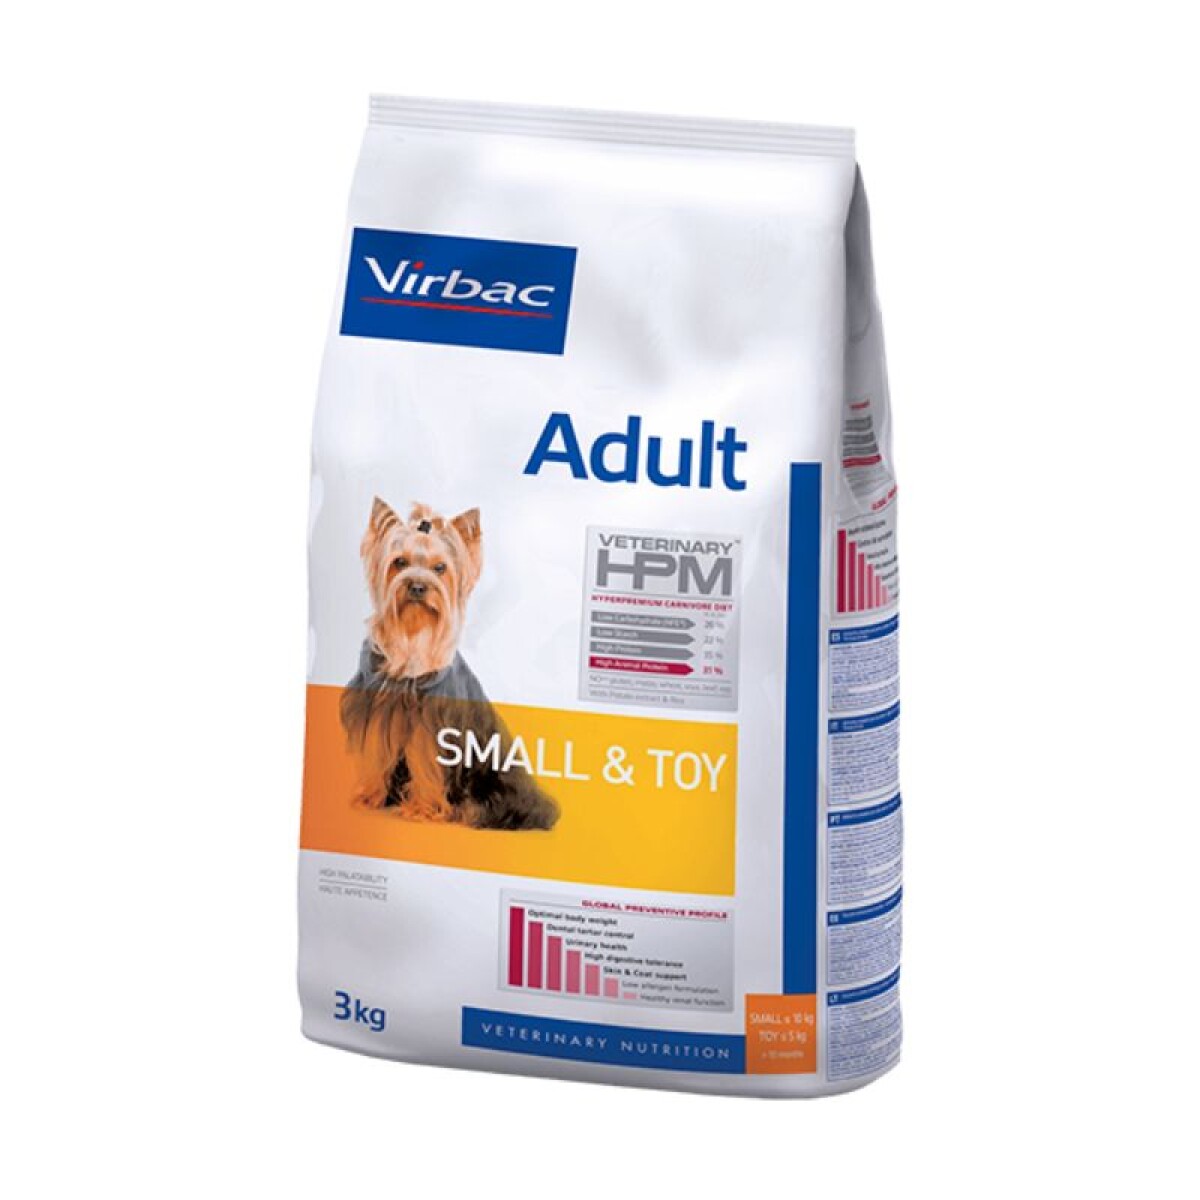 HPM DOG ADULT SMALL & TOY 3KG - Hpm Dog Adult Small & Toy 3kg 